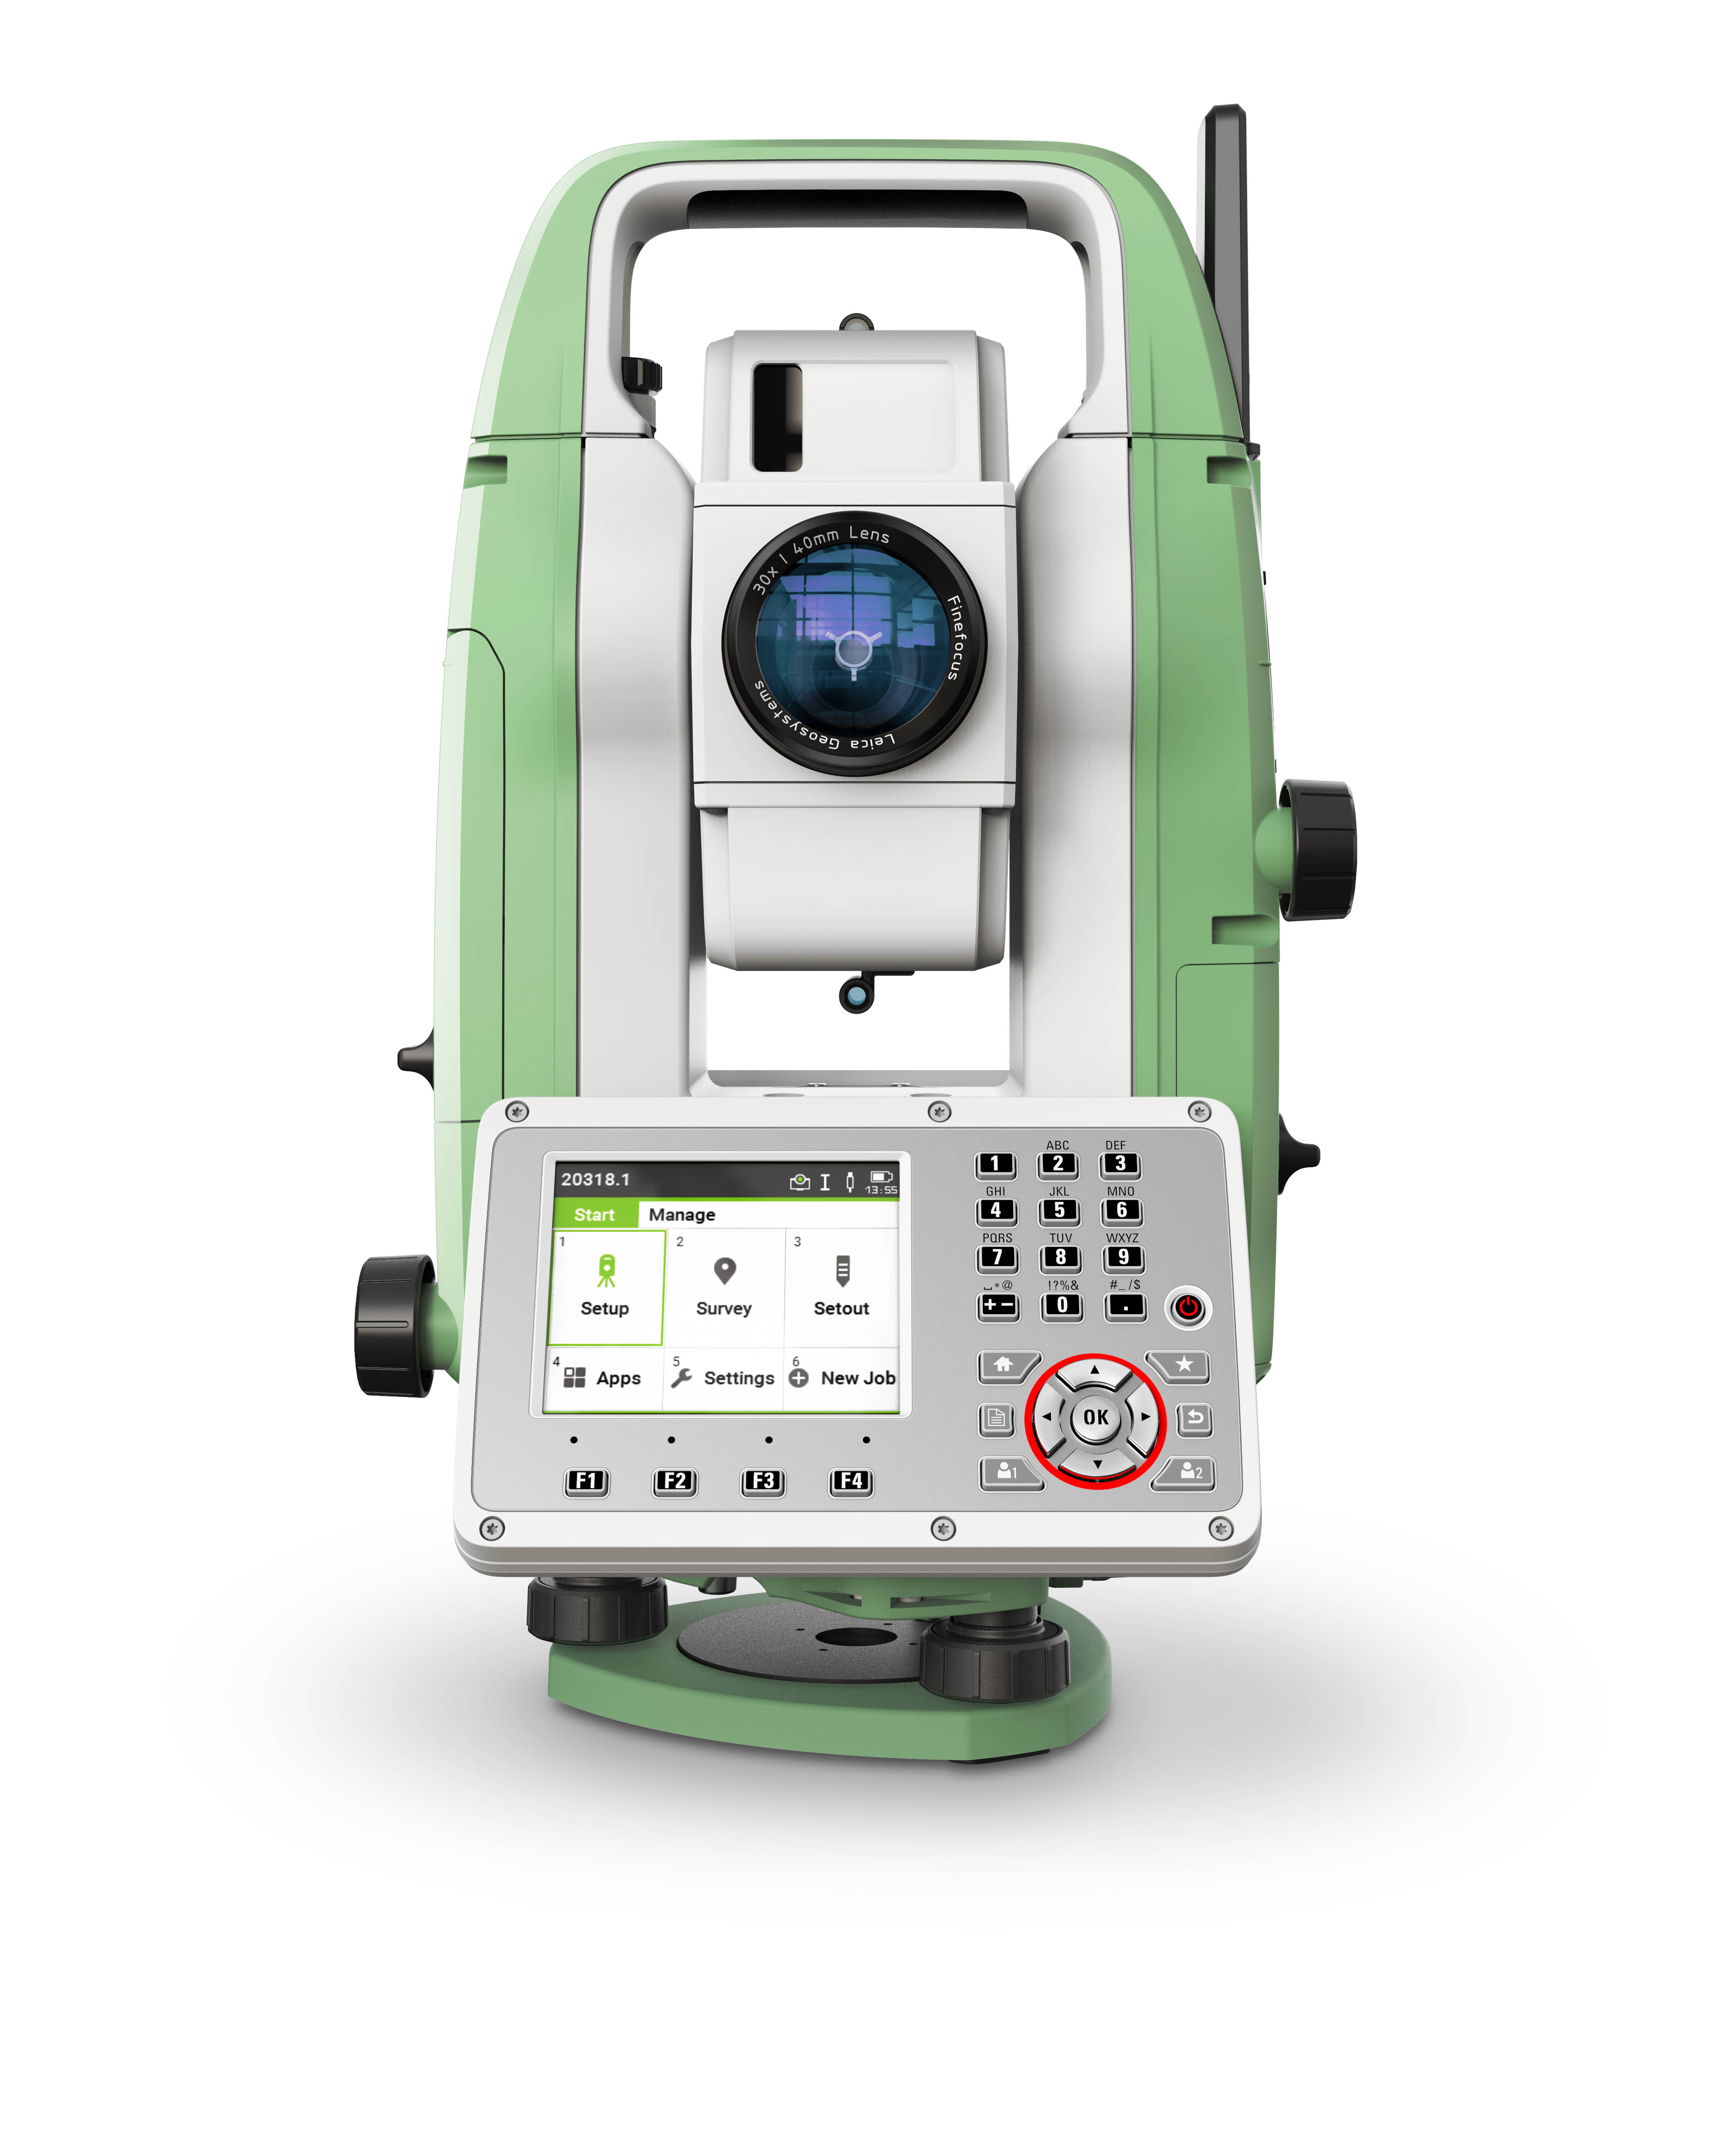 Leica Flexline Ts07 Total Station For Sale Or Hire By Survey - 